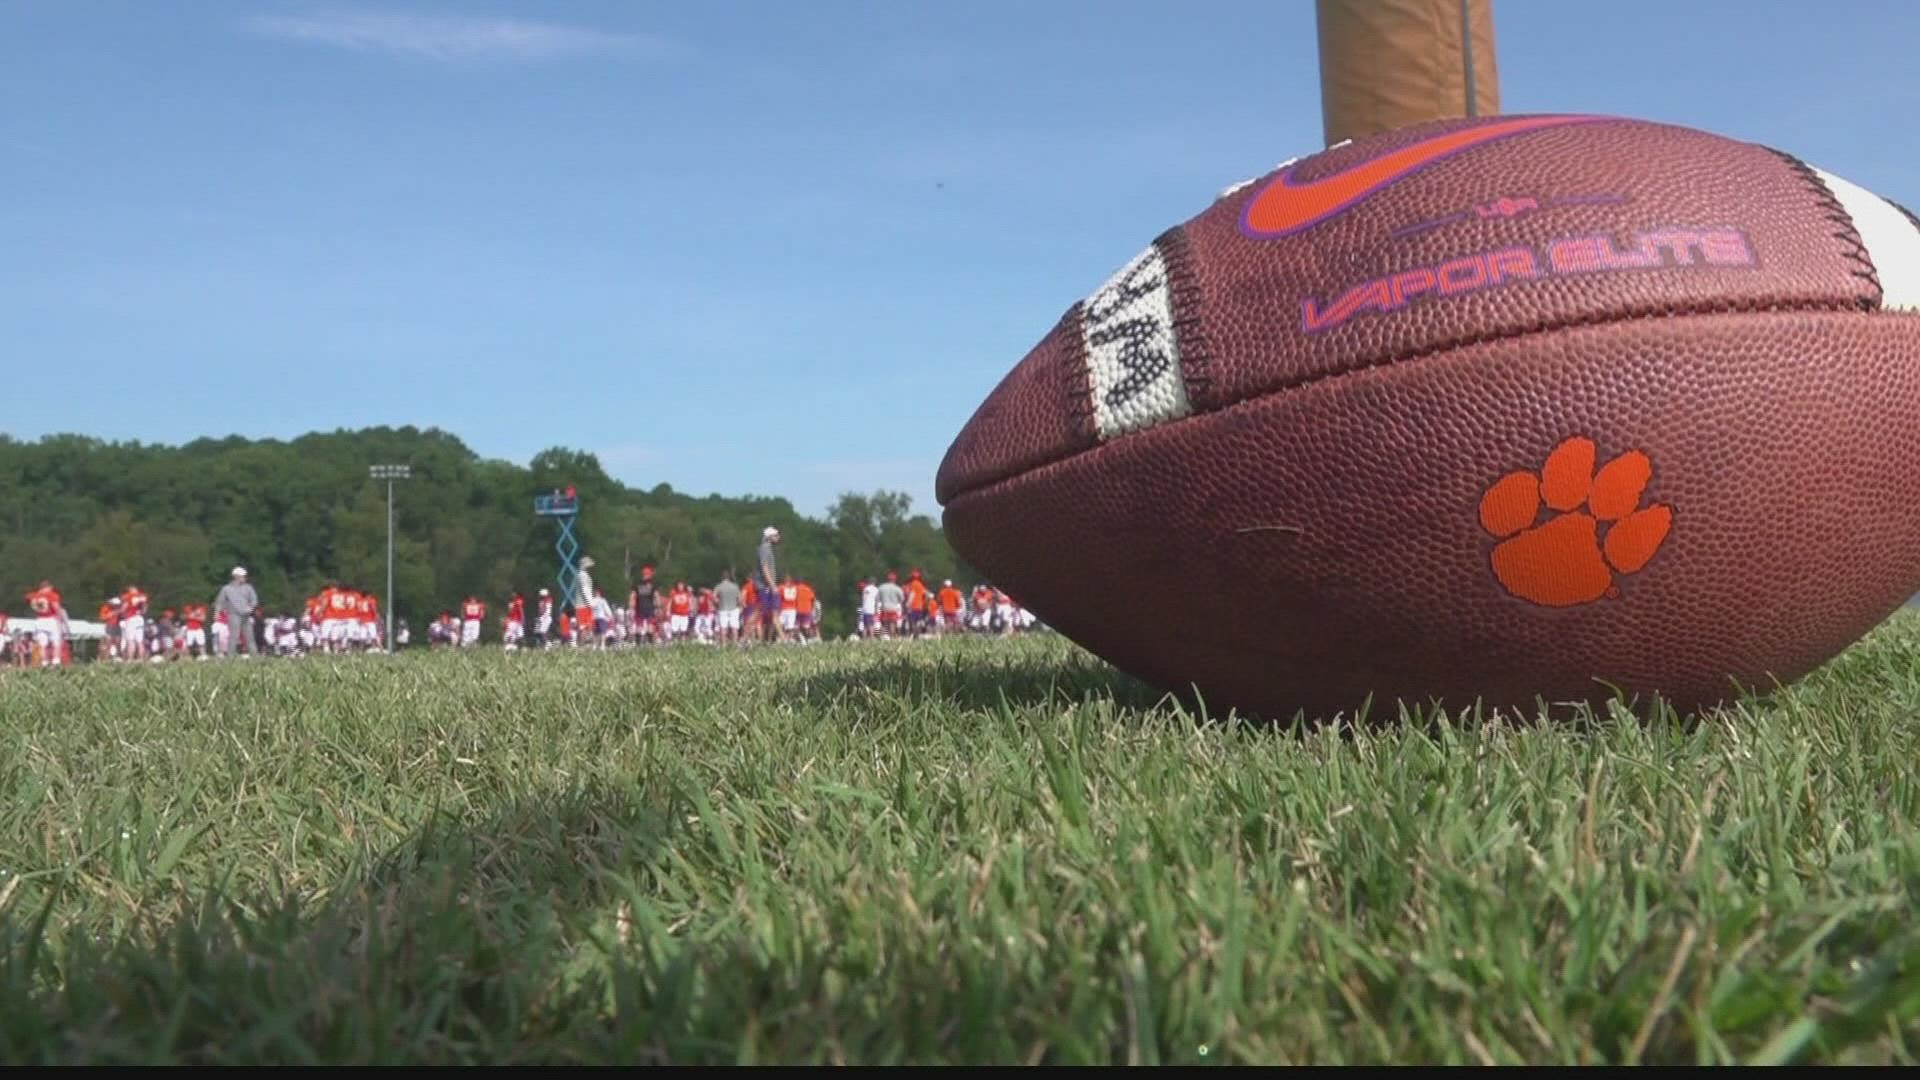 Clemson held its first preseason practice in full pads and they did so at Jervey Meadows. Also, Dutch Fork grad Will Taylor continues to make a positive impression